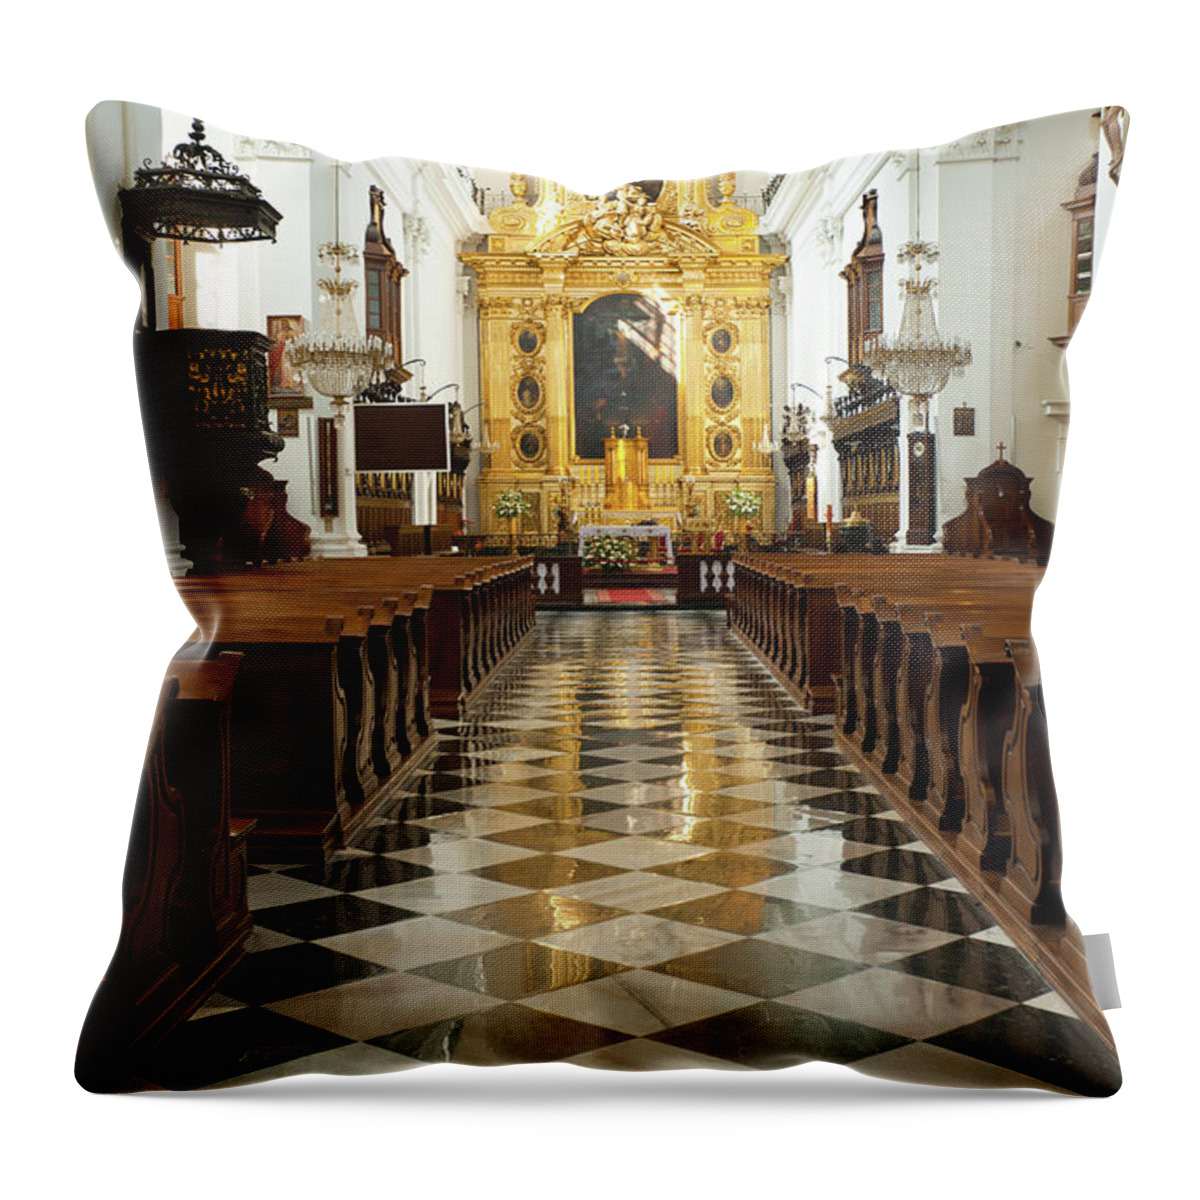  Throw Pillow featuring the photograph Warsaw Catholic Cathedral #3 by Bill Robinson